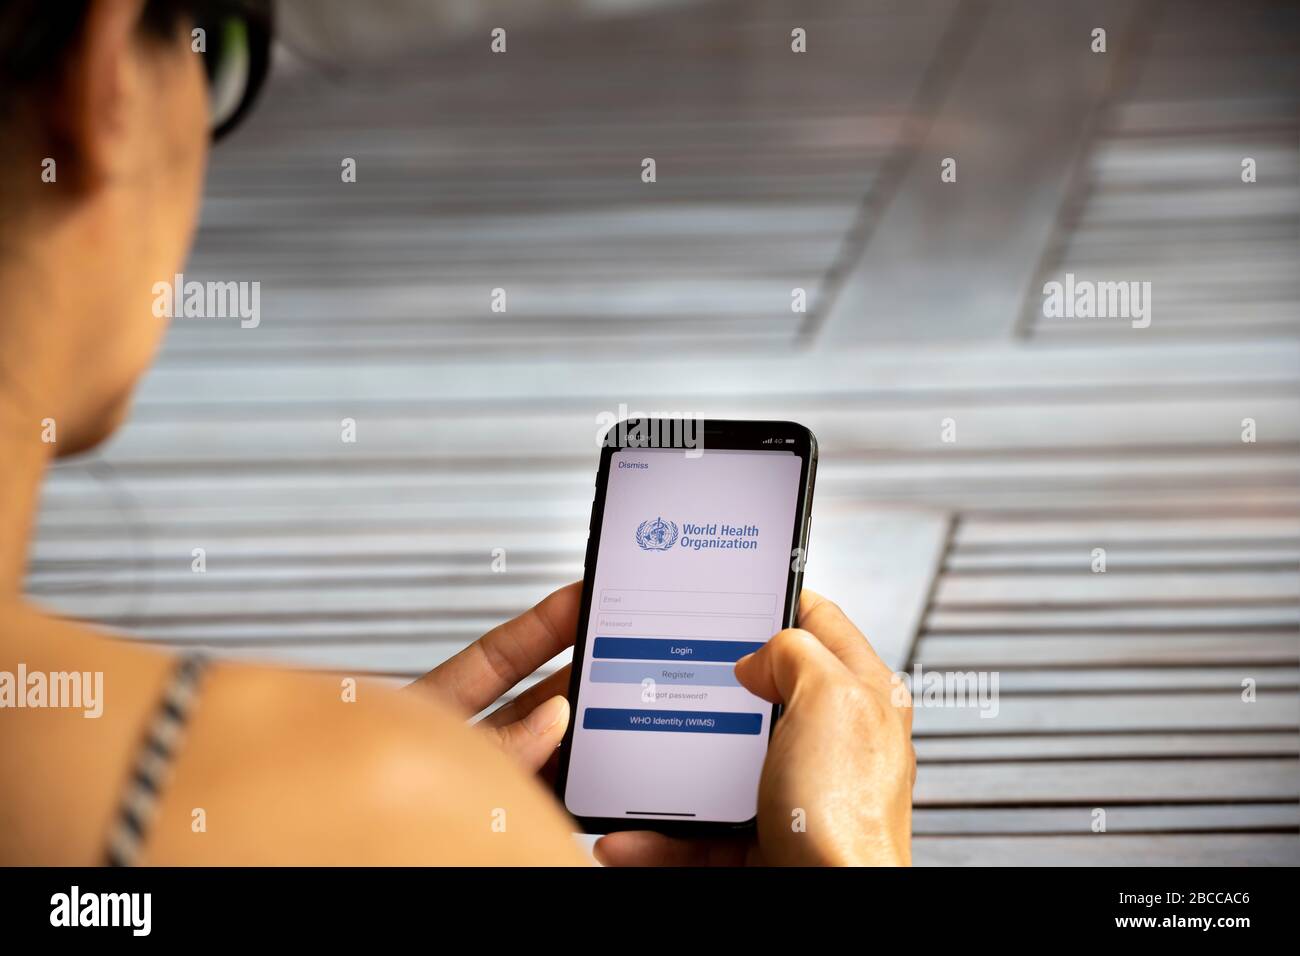 Woman registering on the World Health Organization application on her smartphone Stock Photo